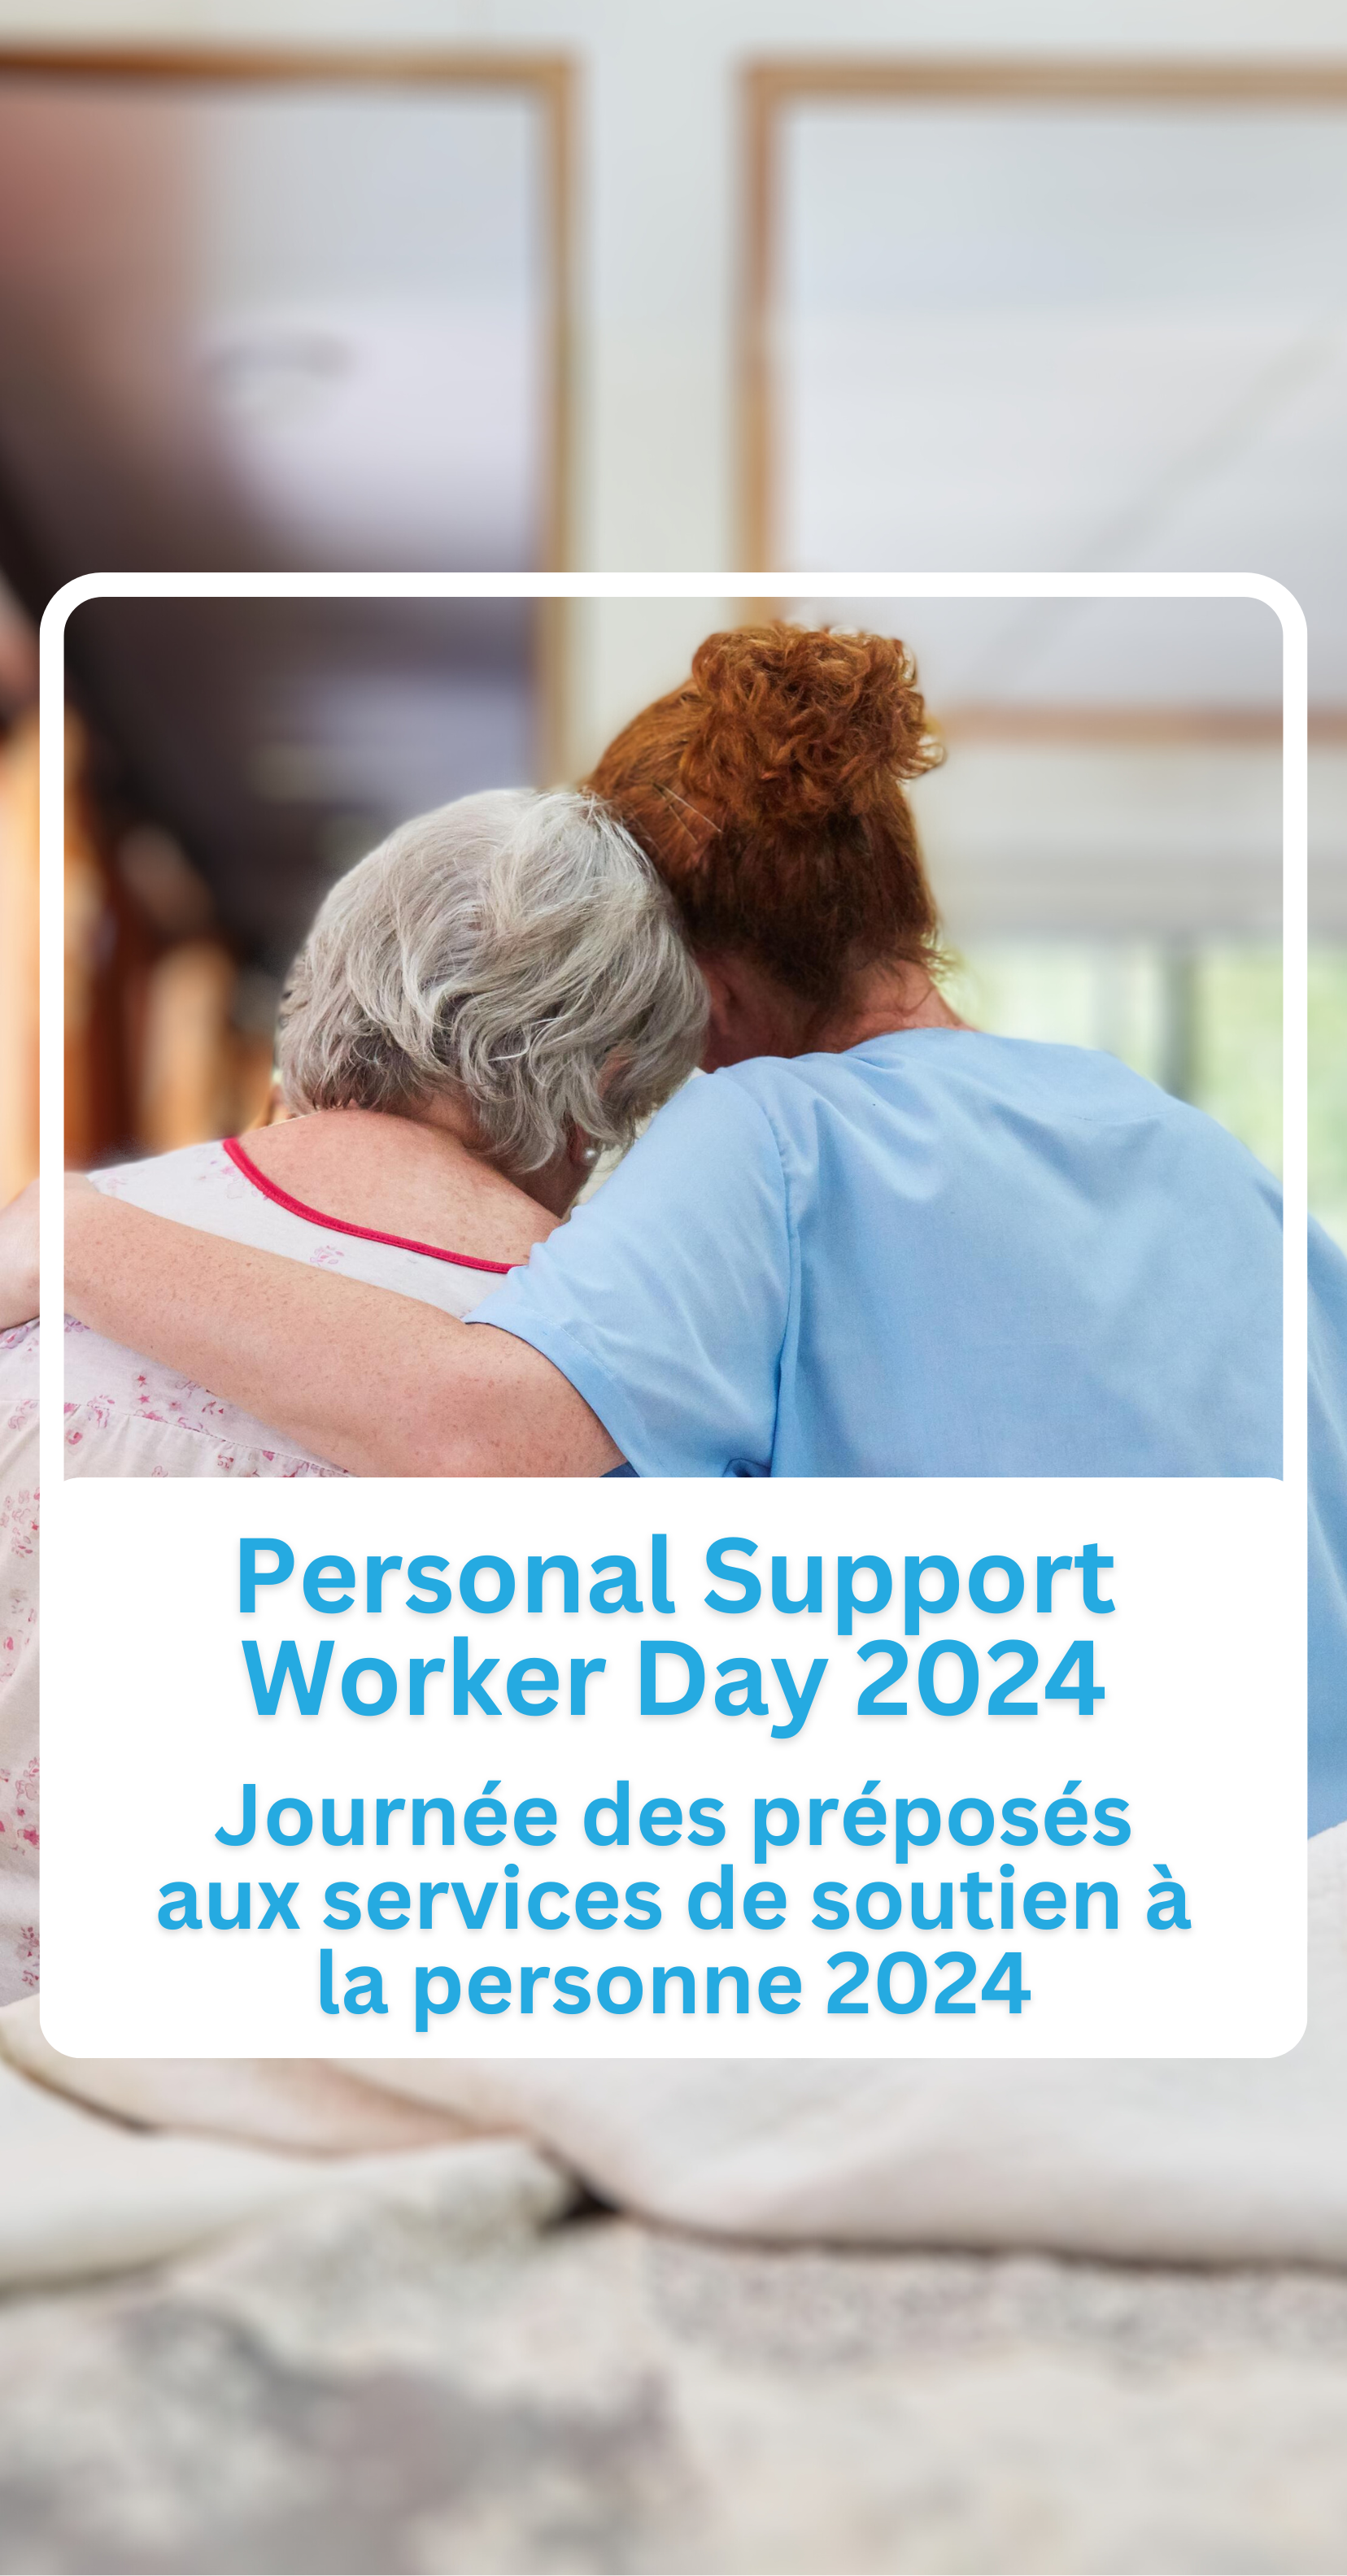 Personal Support Worker Day